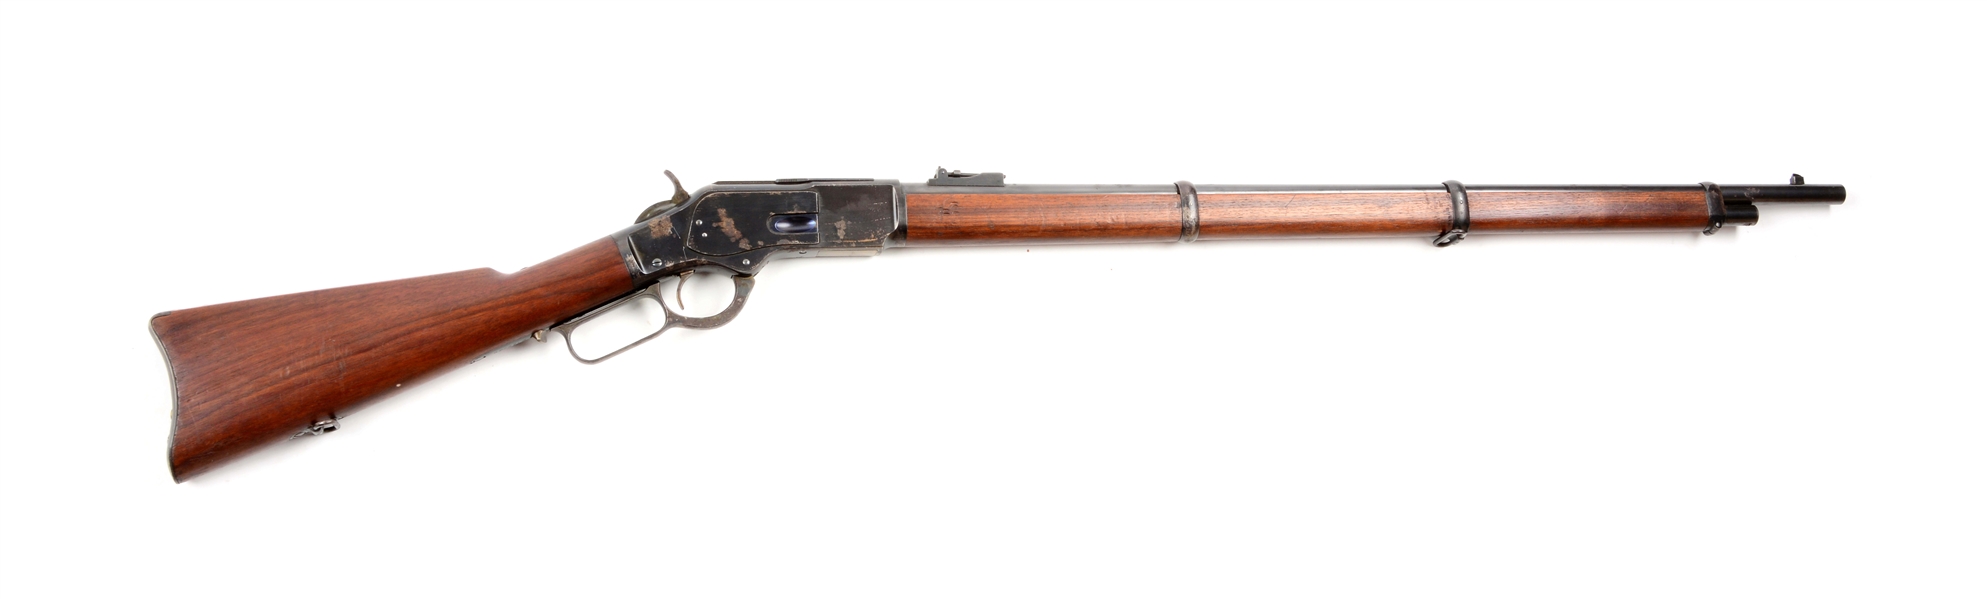 (C) WINCHESTER MODEL 1873 MUSKET.